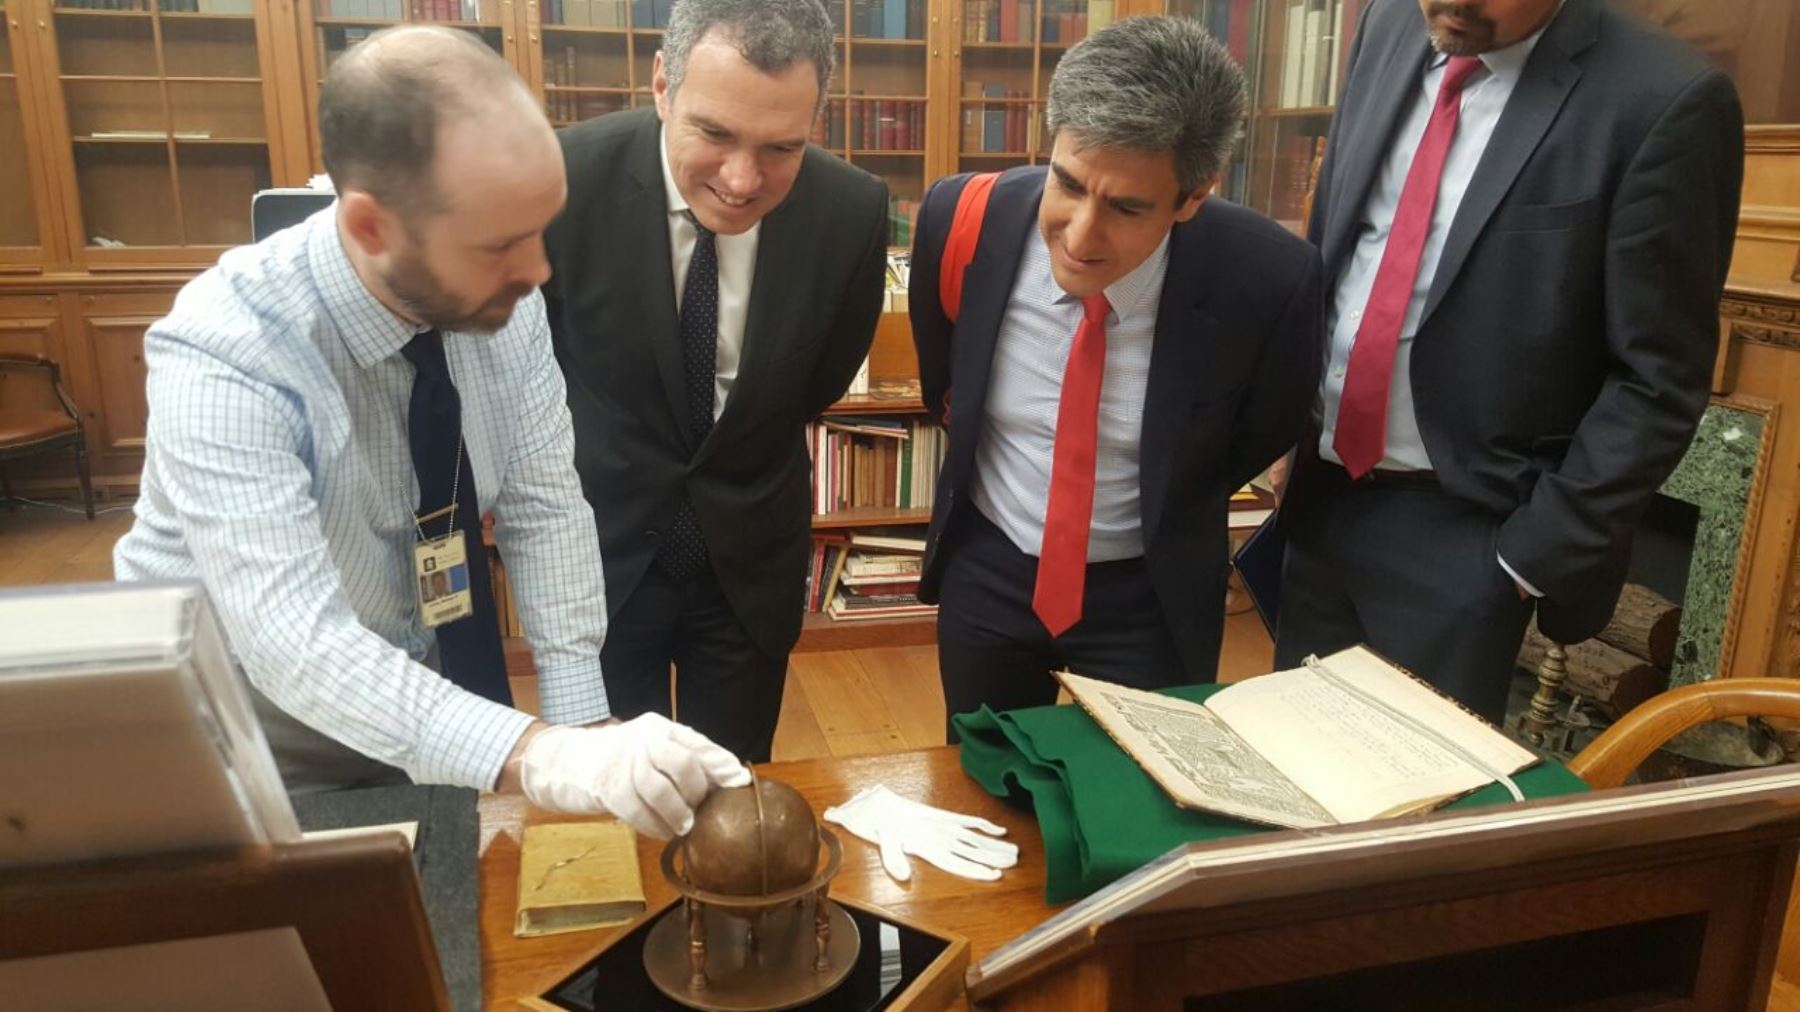 Peru’s National Library and New York Public Library join forces